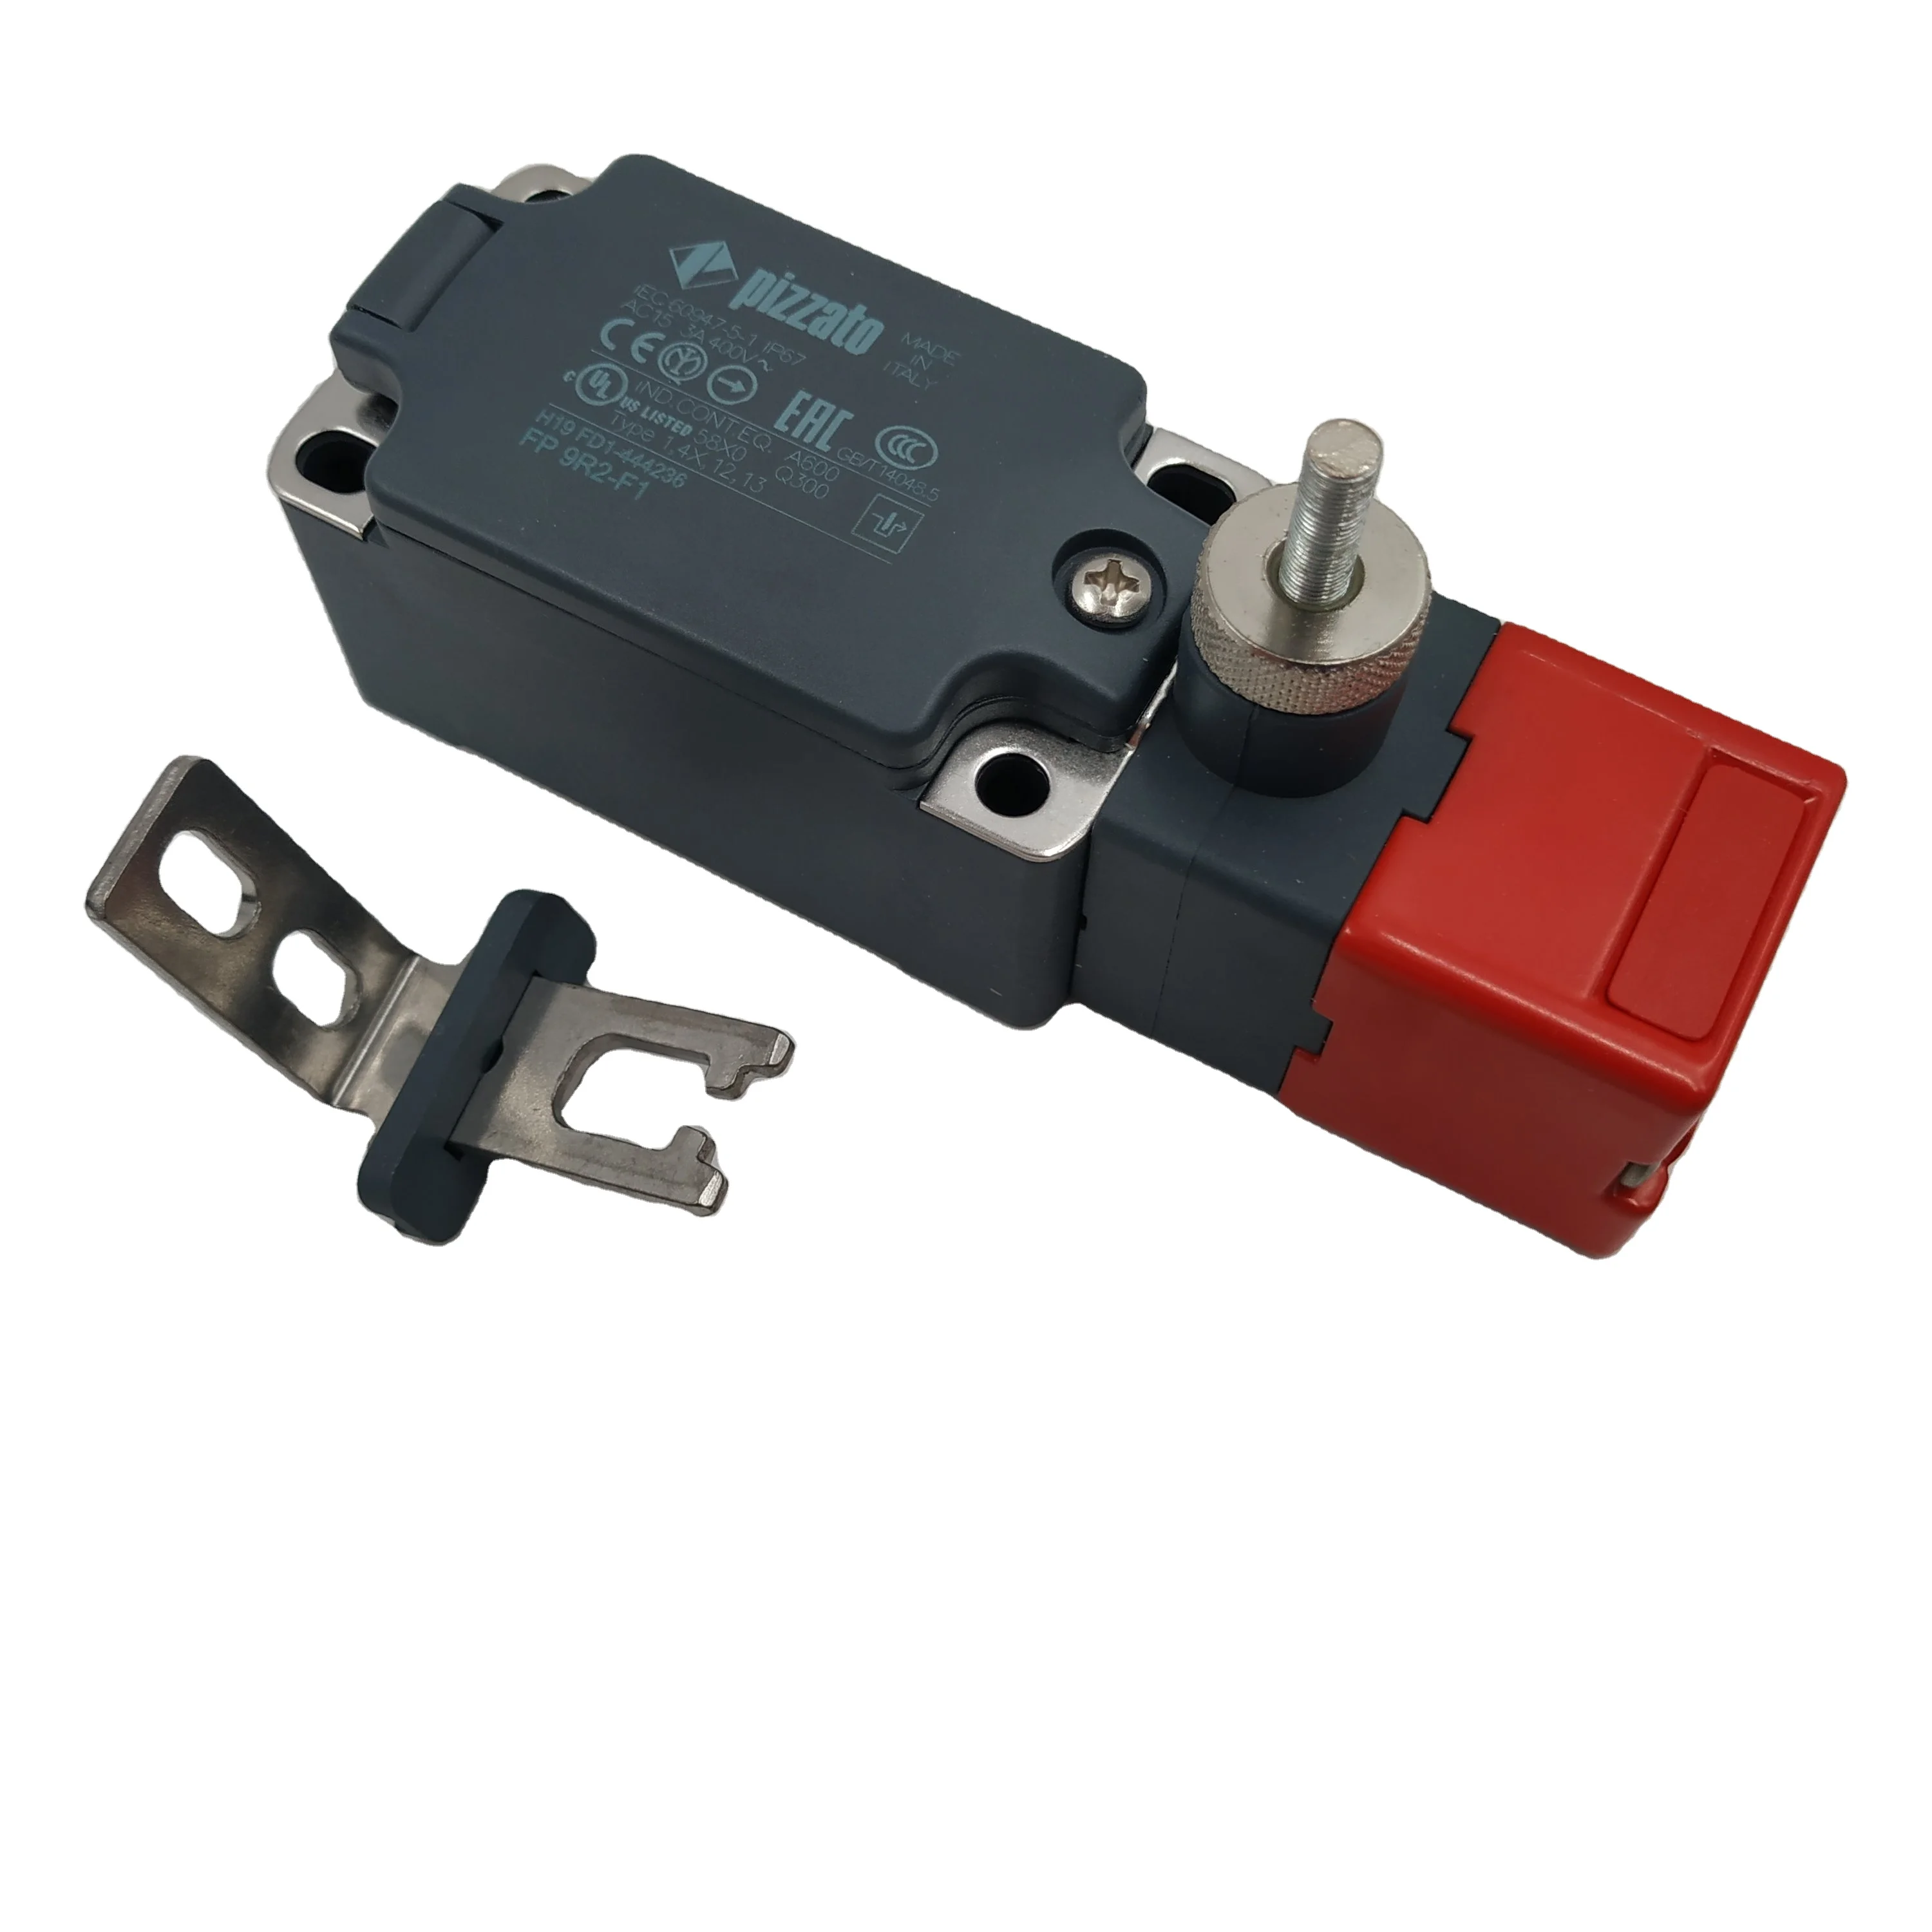 Pizzato Limit Switch Original New Made In Italy Pizzato Safety Switch Fp  9r2-f1 Pizzato - Buy Pizzato Limit Switch Fp 9r2-f1,Pizzato Fp  9r2-f1,Pizzato Swtiches Product on Alibaba.com